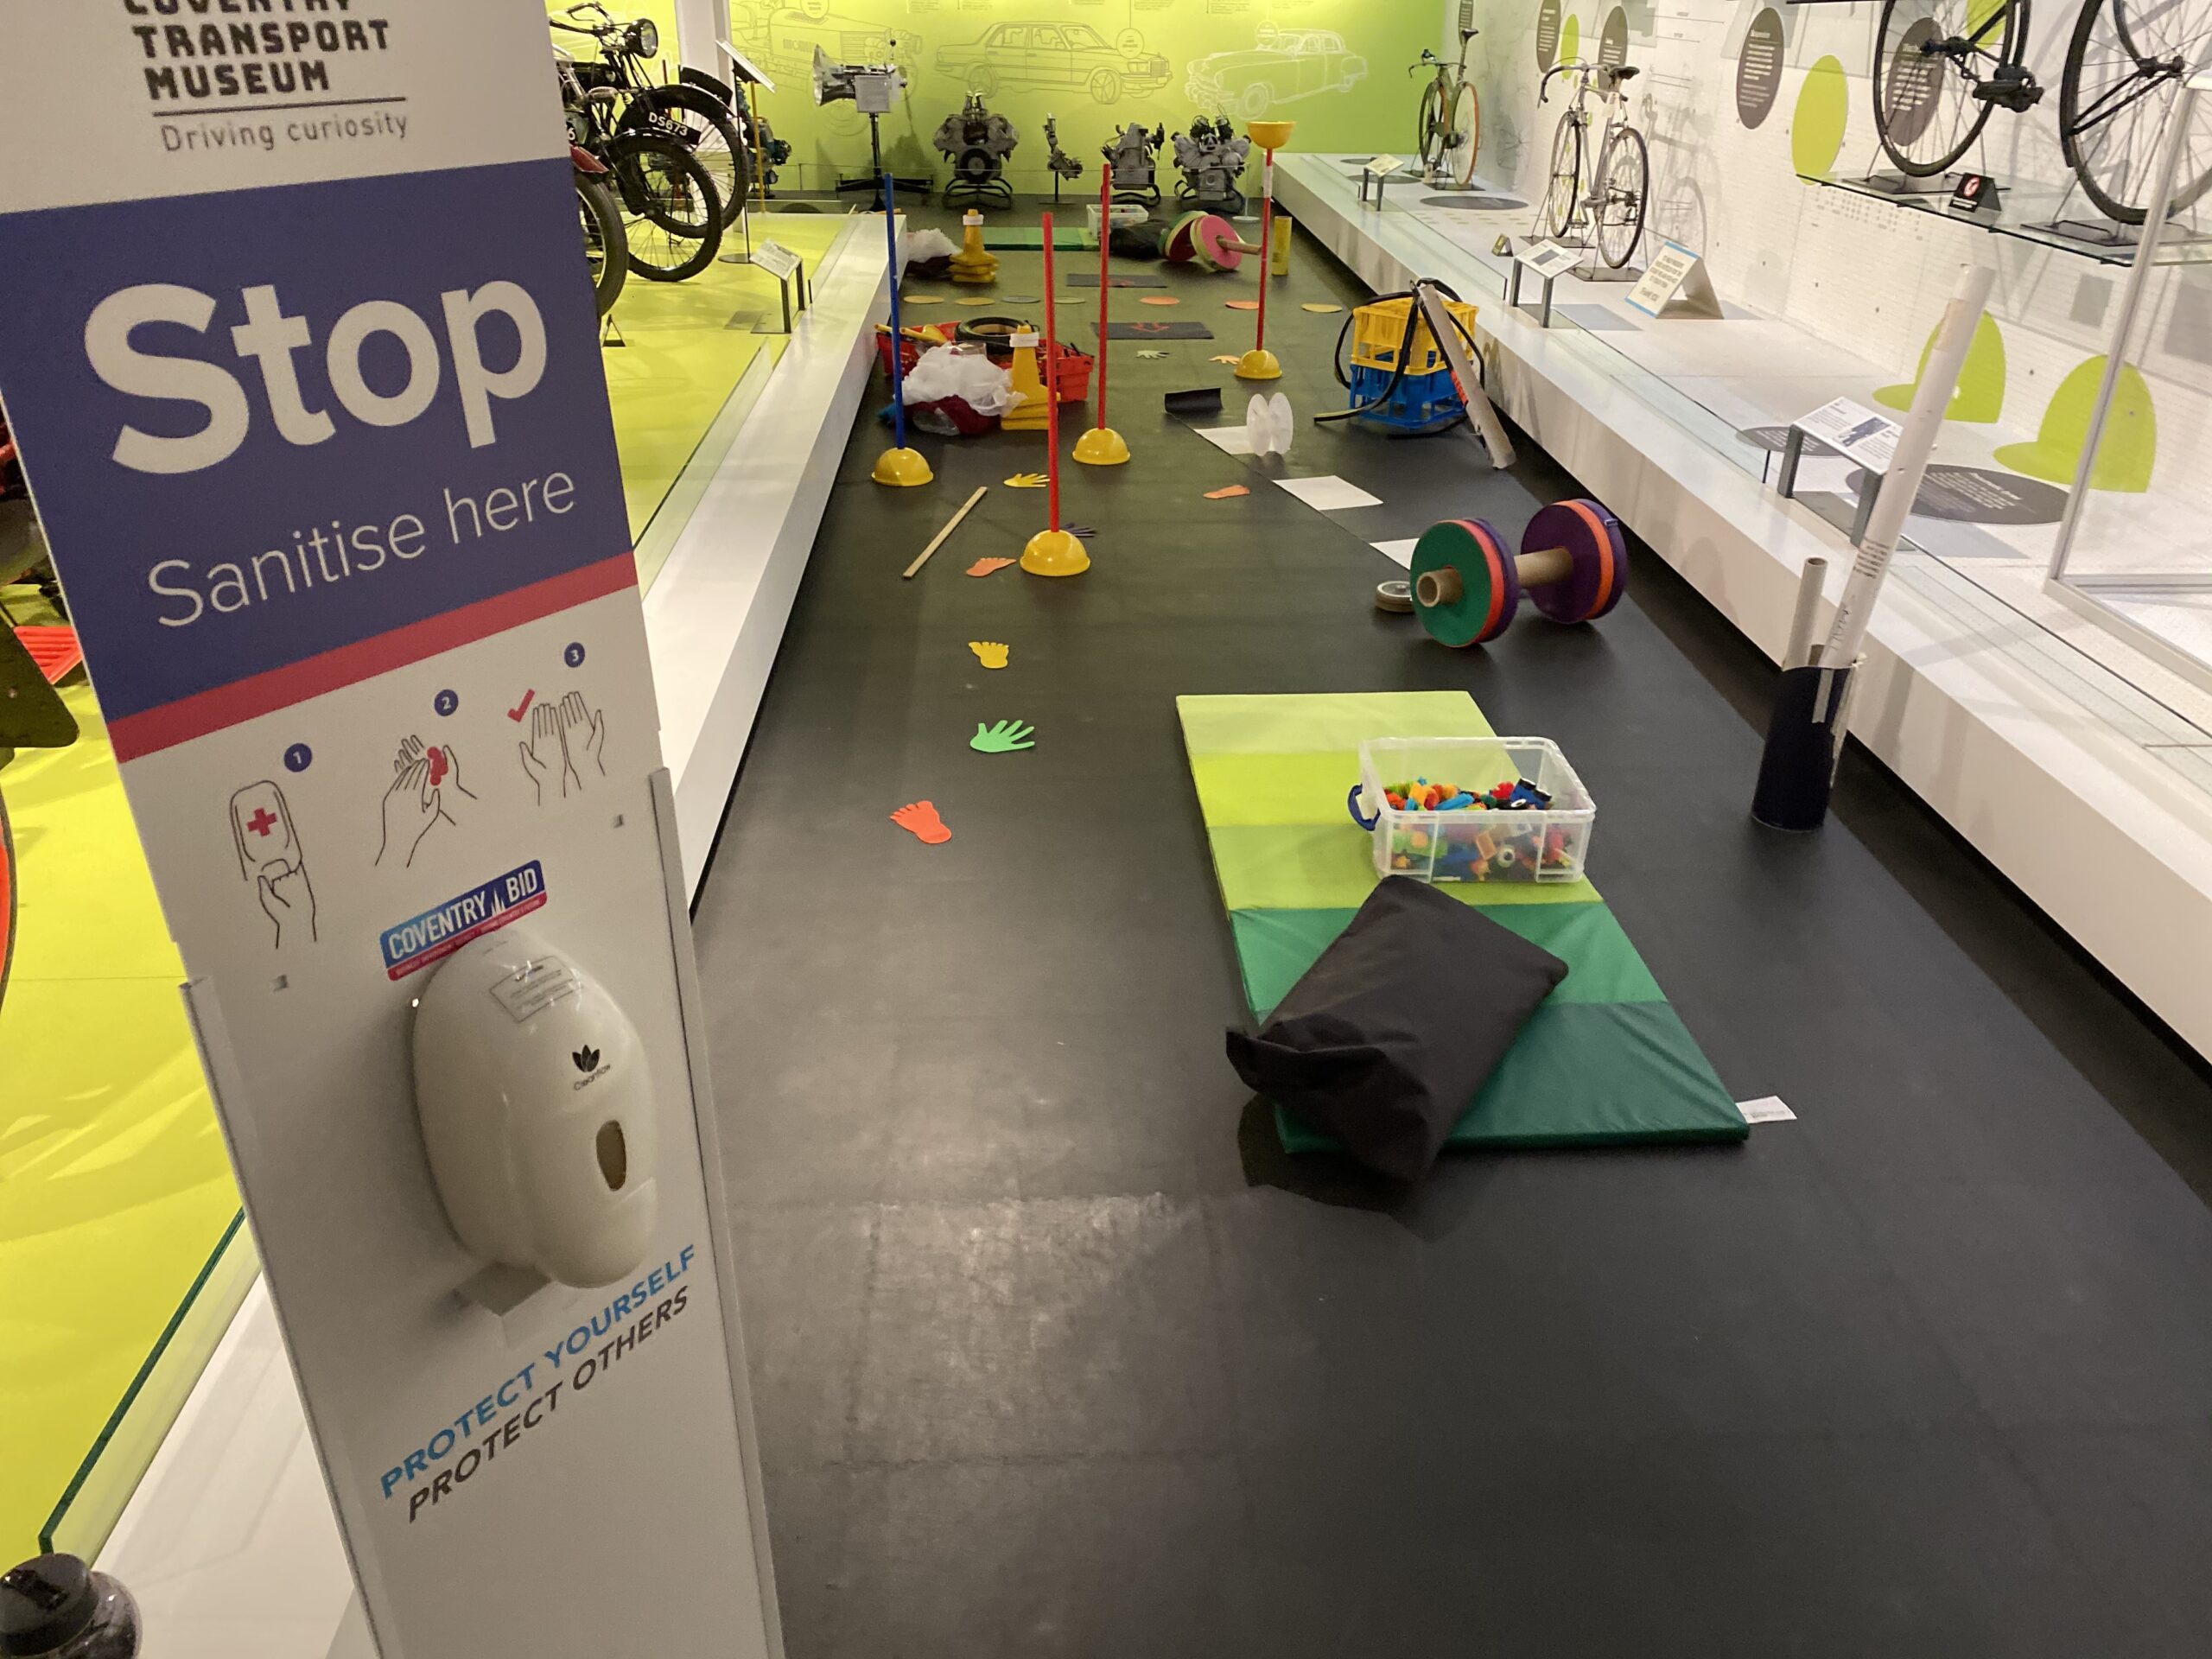 A playmat and various toys and loose parts are laid out on the floor in a gallery display of bicycles.